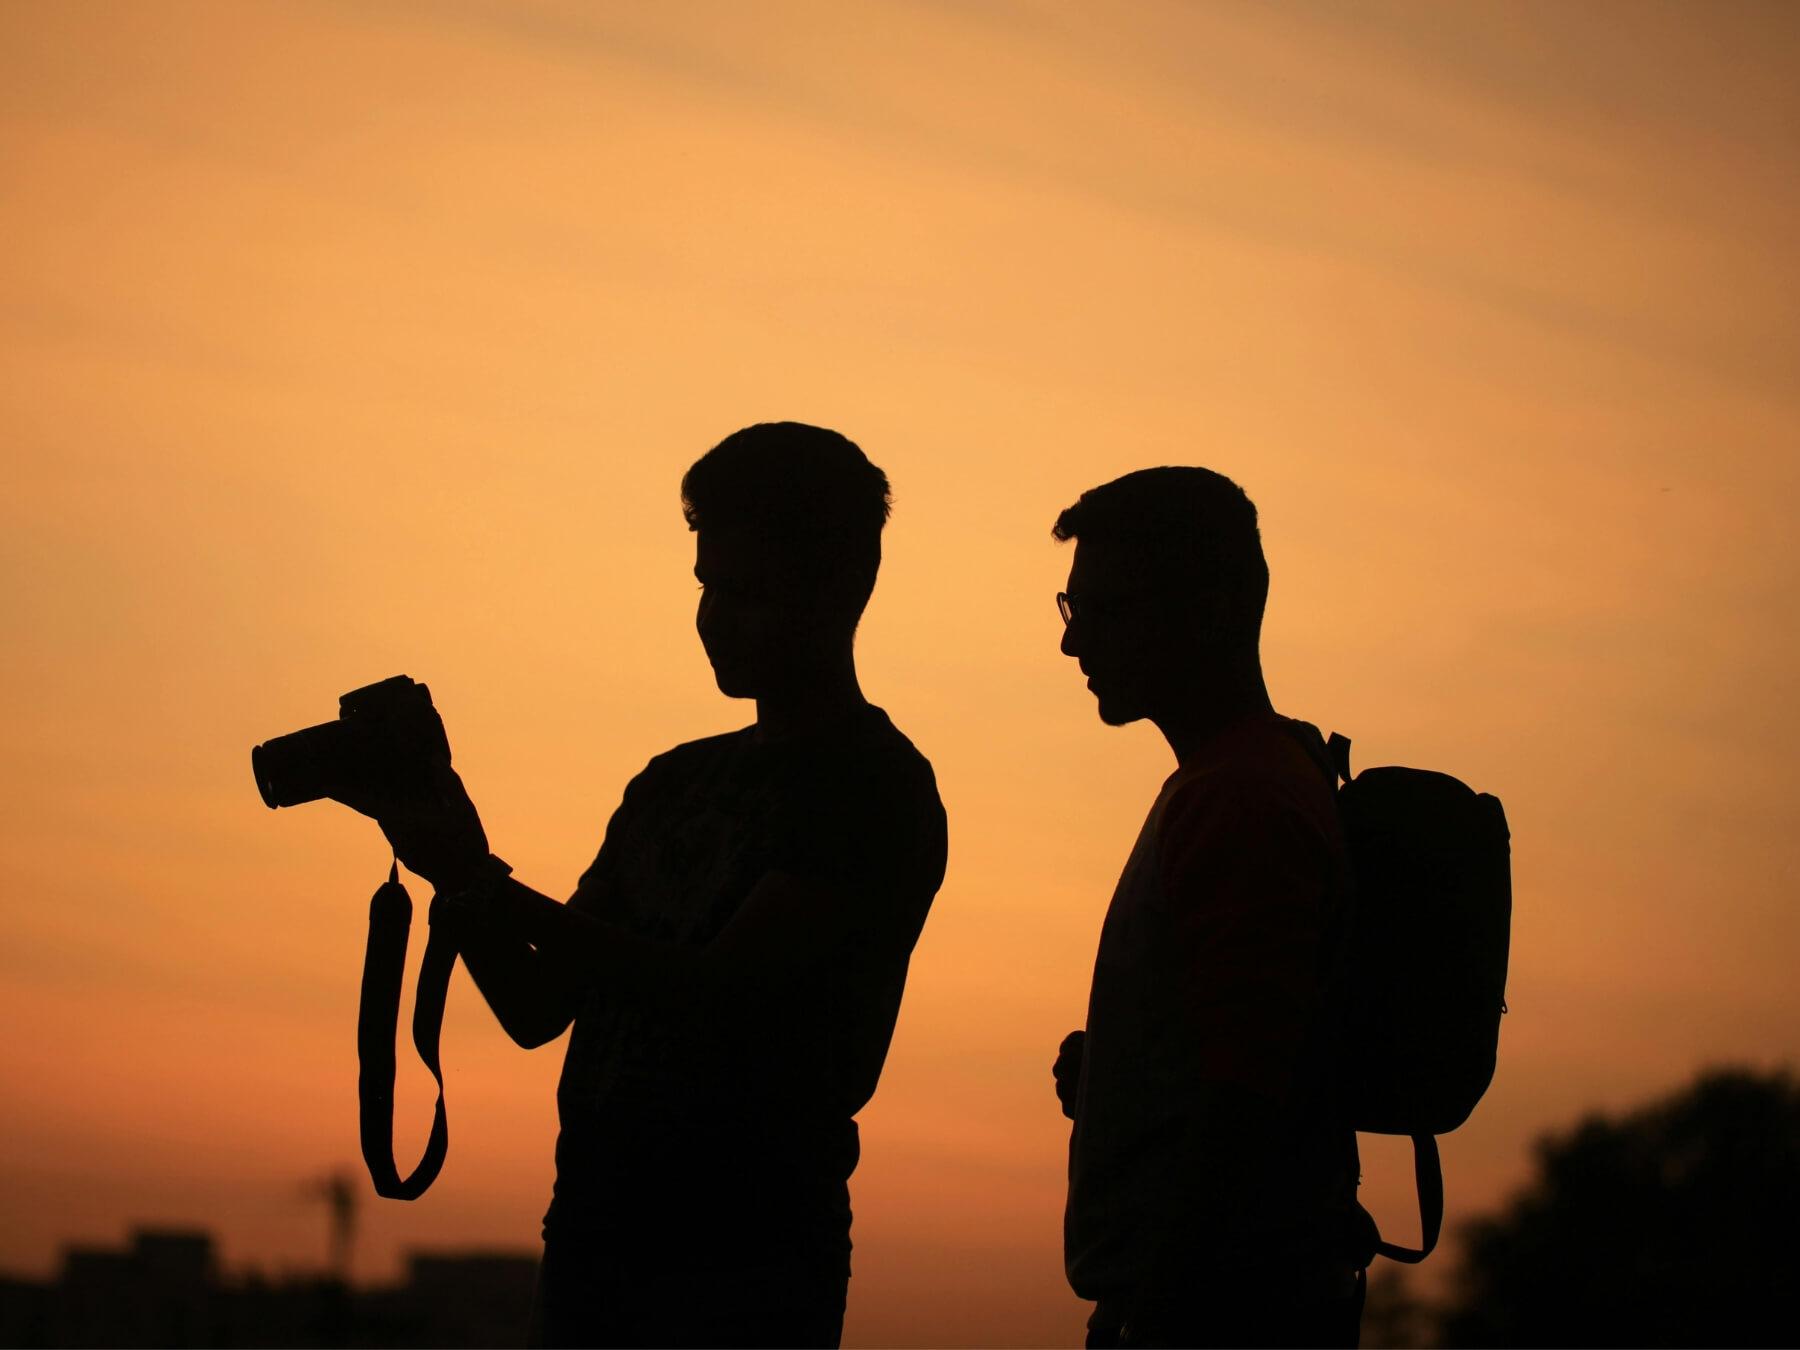 Silhouette of man holding a camera with a tripod 